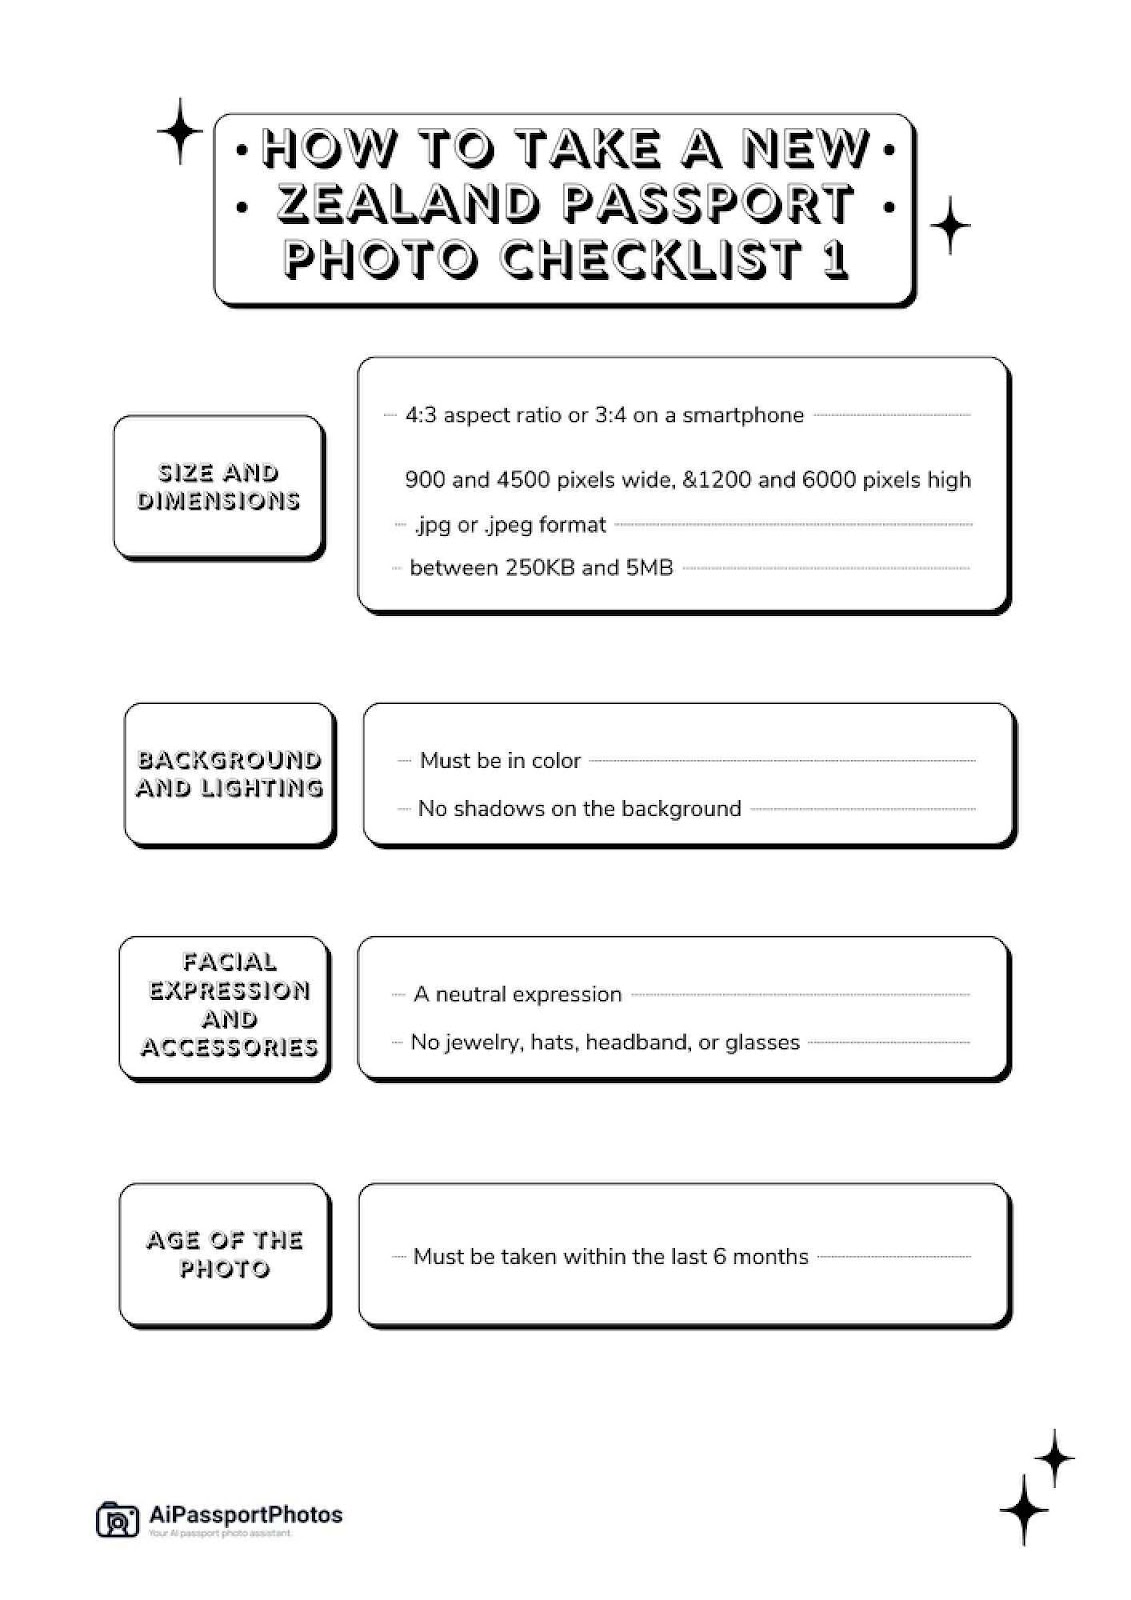 How to Take a New Zealand Passport Photo Checklist 1